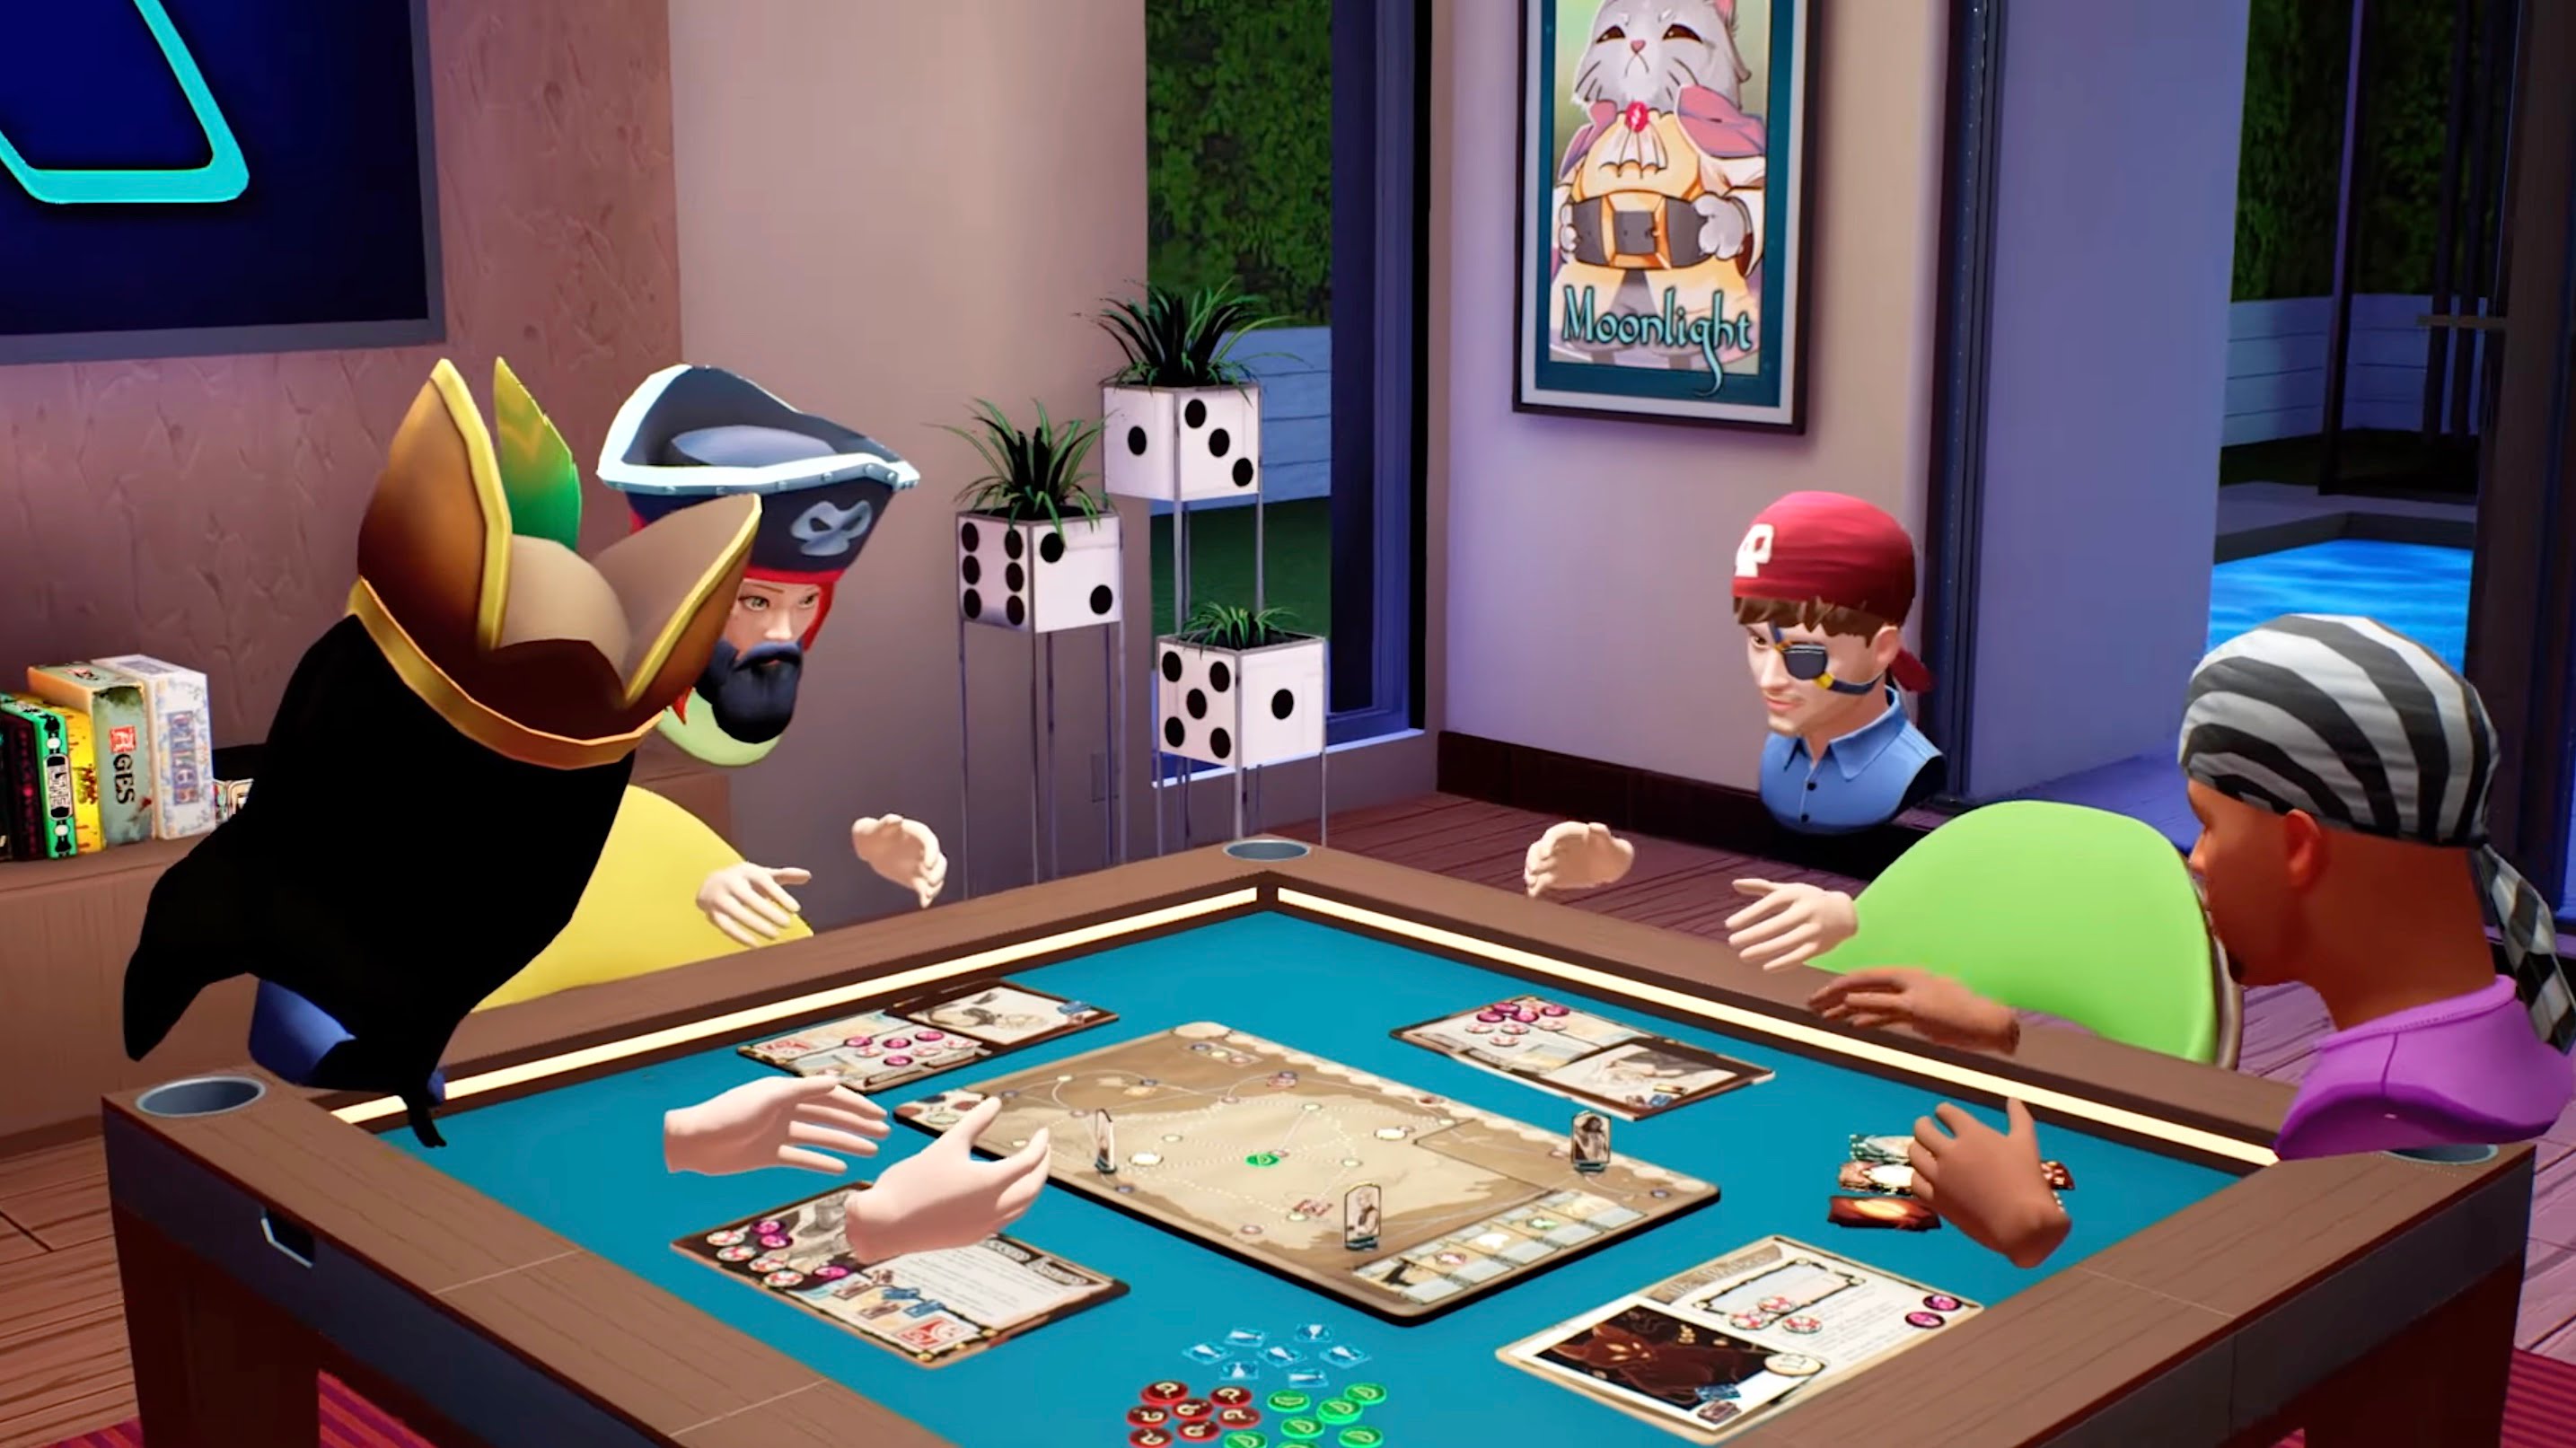 "All on Board" brings board game nights to virtual reality